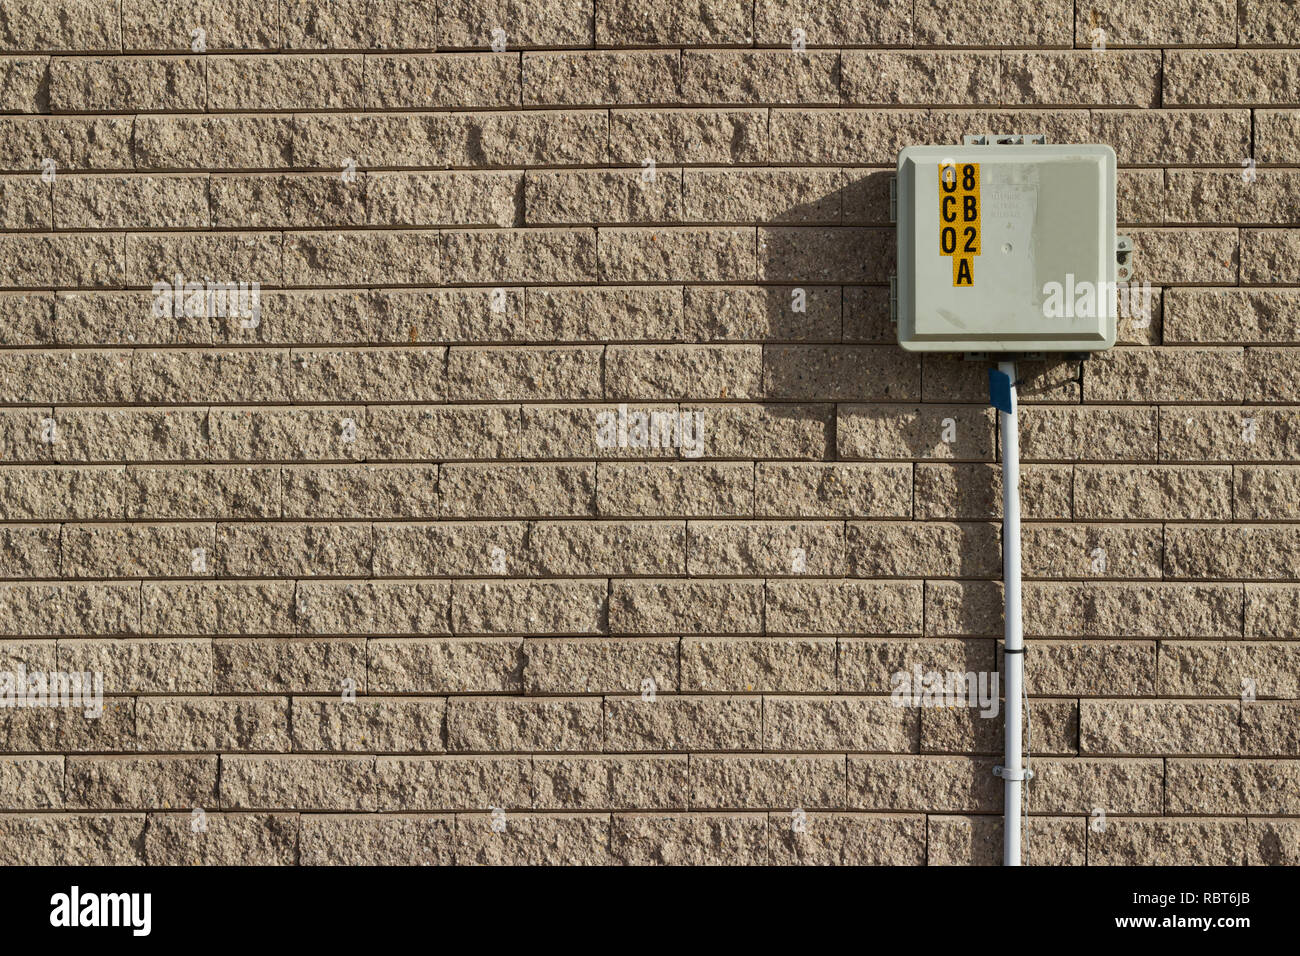 Light brown tan colored rough textured stone brick wall abstract background with attached telephone utility box and pole Stock Photo